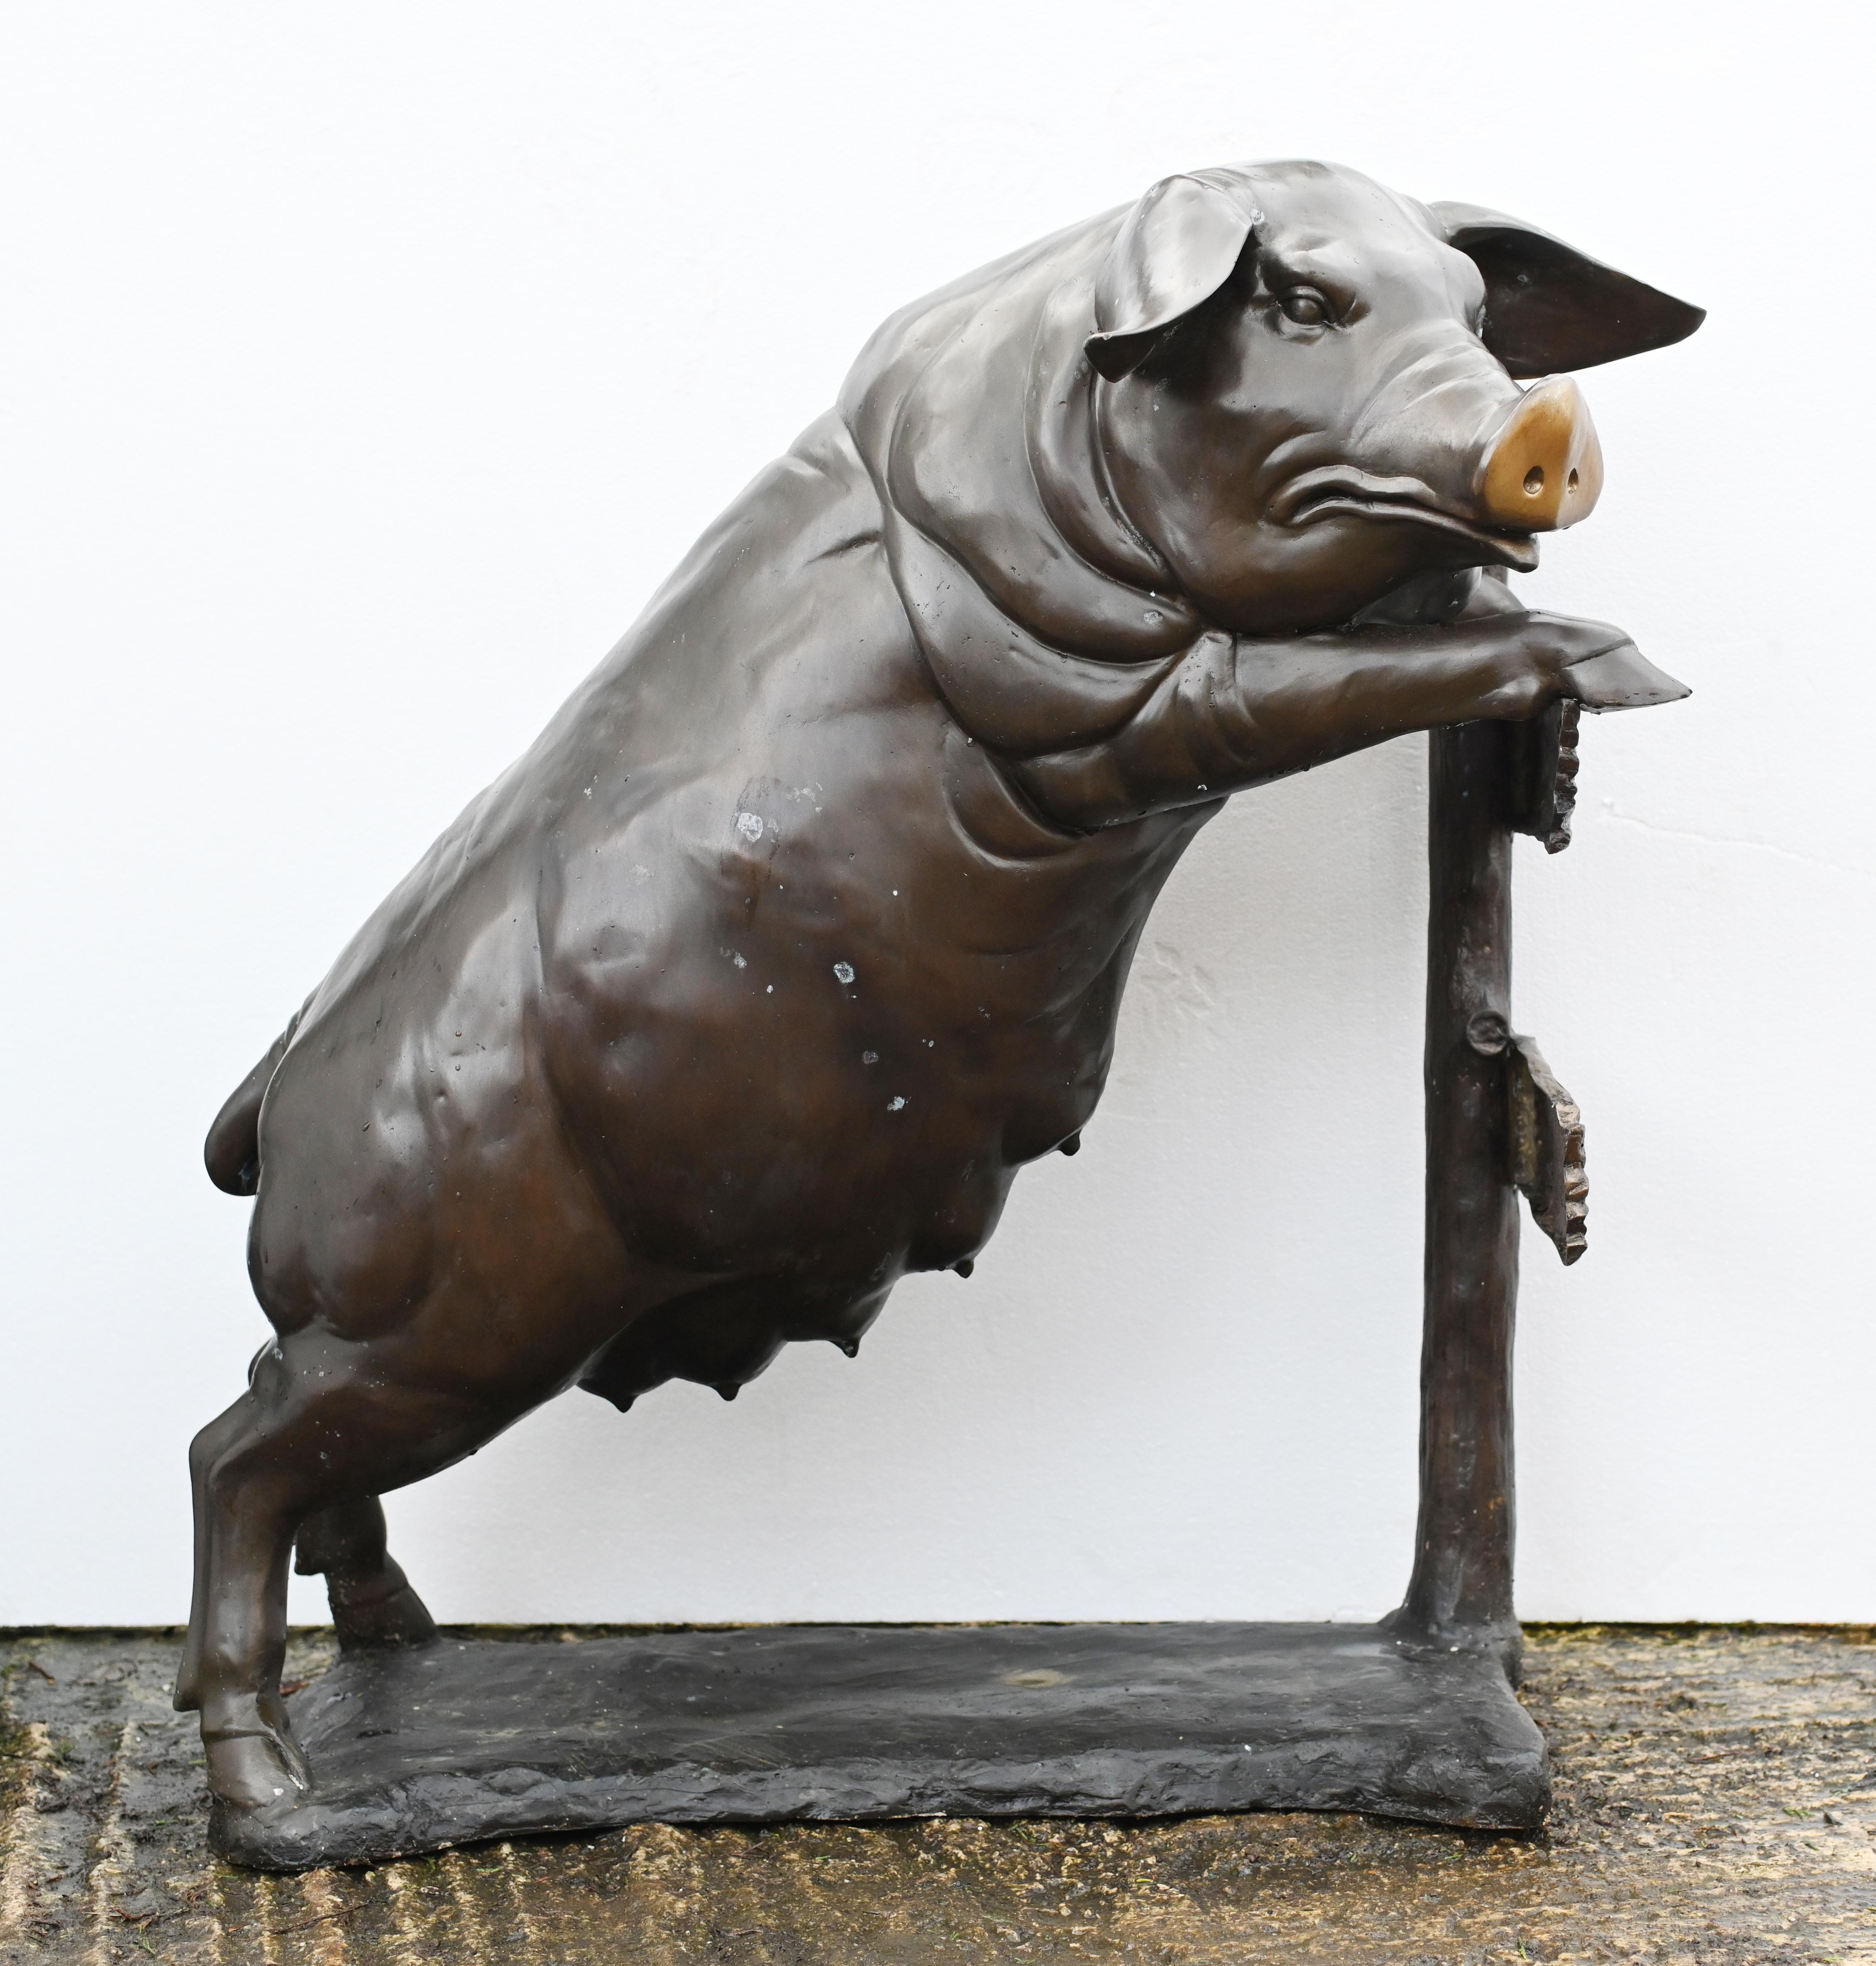 Very quirky lifesize bronze pig statue 
Stands in at over three feet tall - 101 CM
The sow stands on the her hind legs leaning on the fence watching over the garden
The patina to this pig is superb, lovely finish to the bronze
Great collectors piece